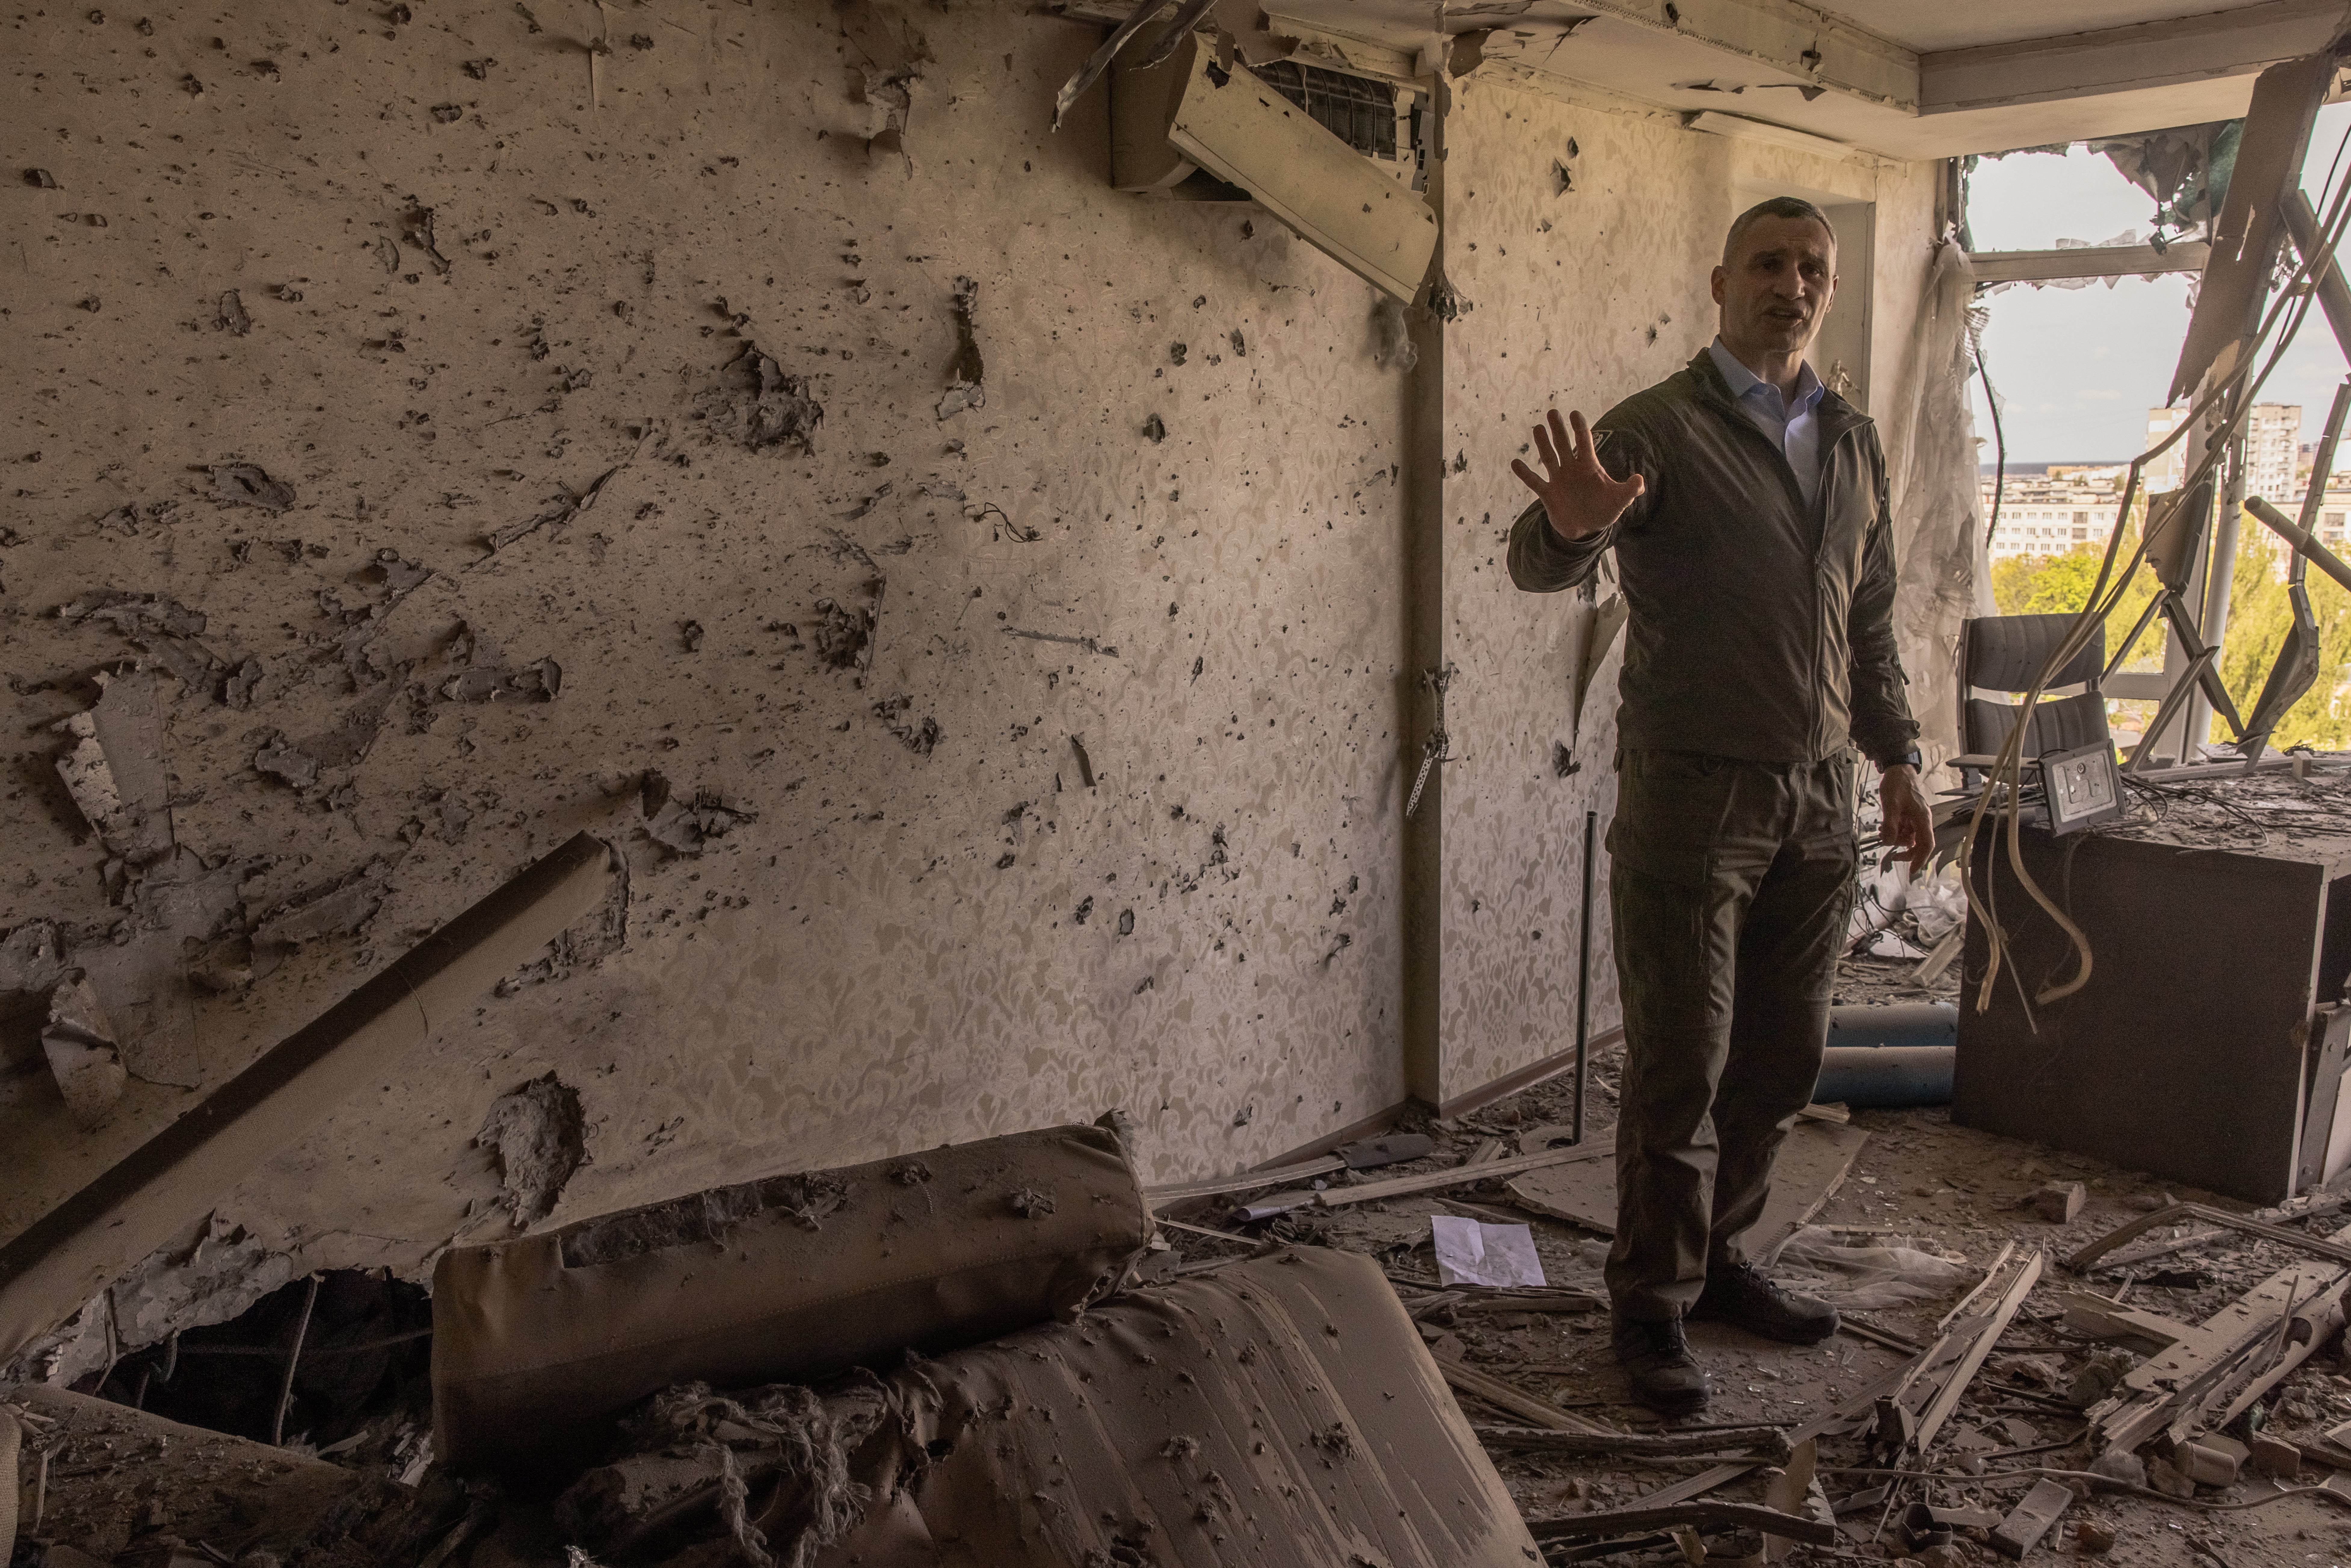 Kyiv mayor Vitali Klitschko visits a home damaged by debris from an intercepted Russian drone